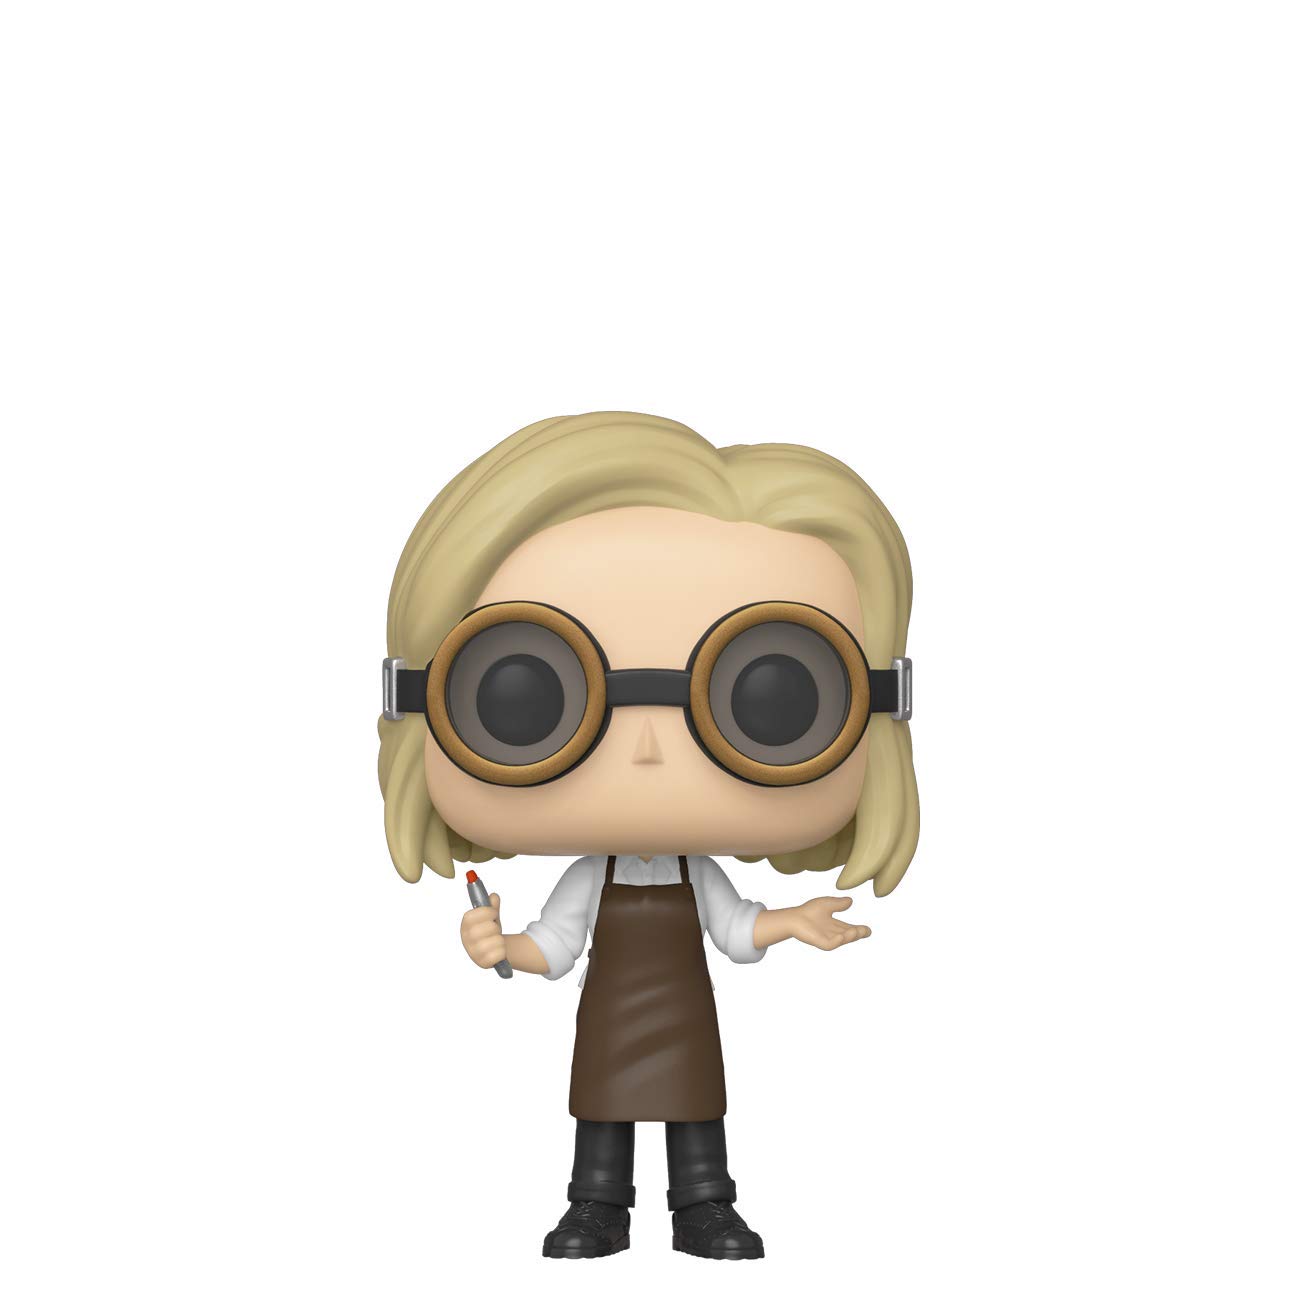 Funko POP! Television: Doctor Who - 13th Doctor with Goggles